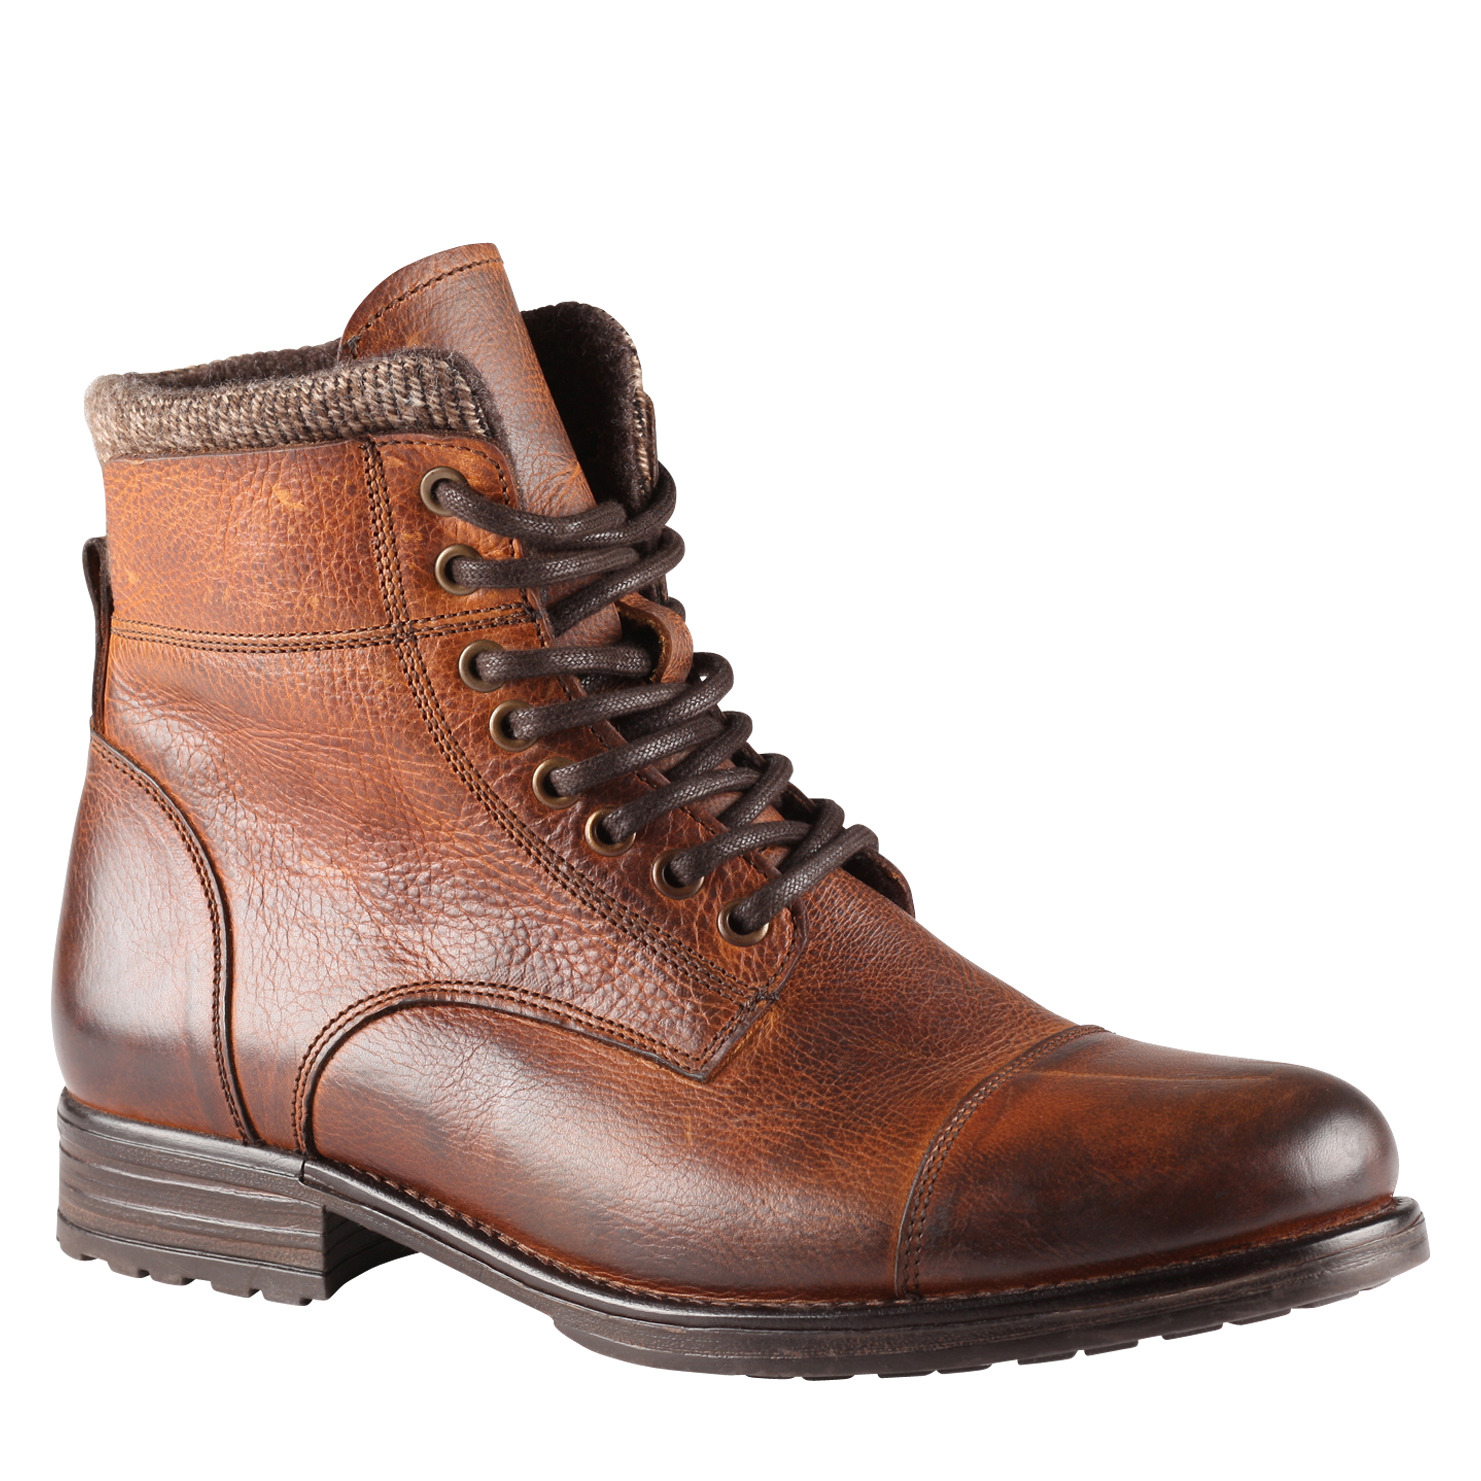 Lyst - Aldo Timo Boots in Brown for Men